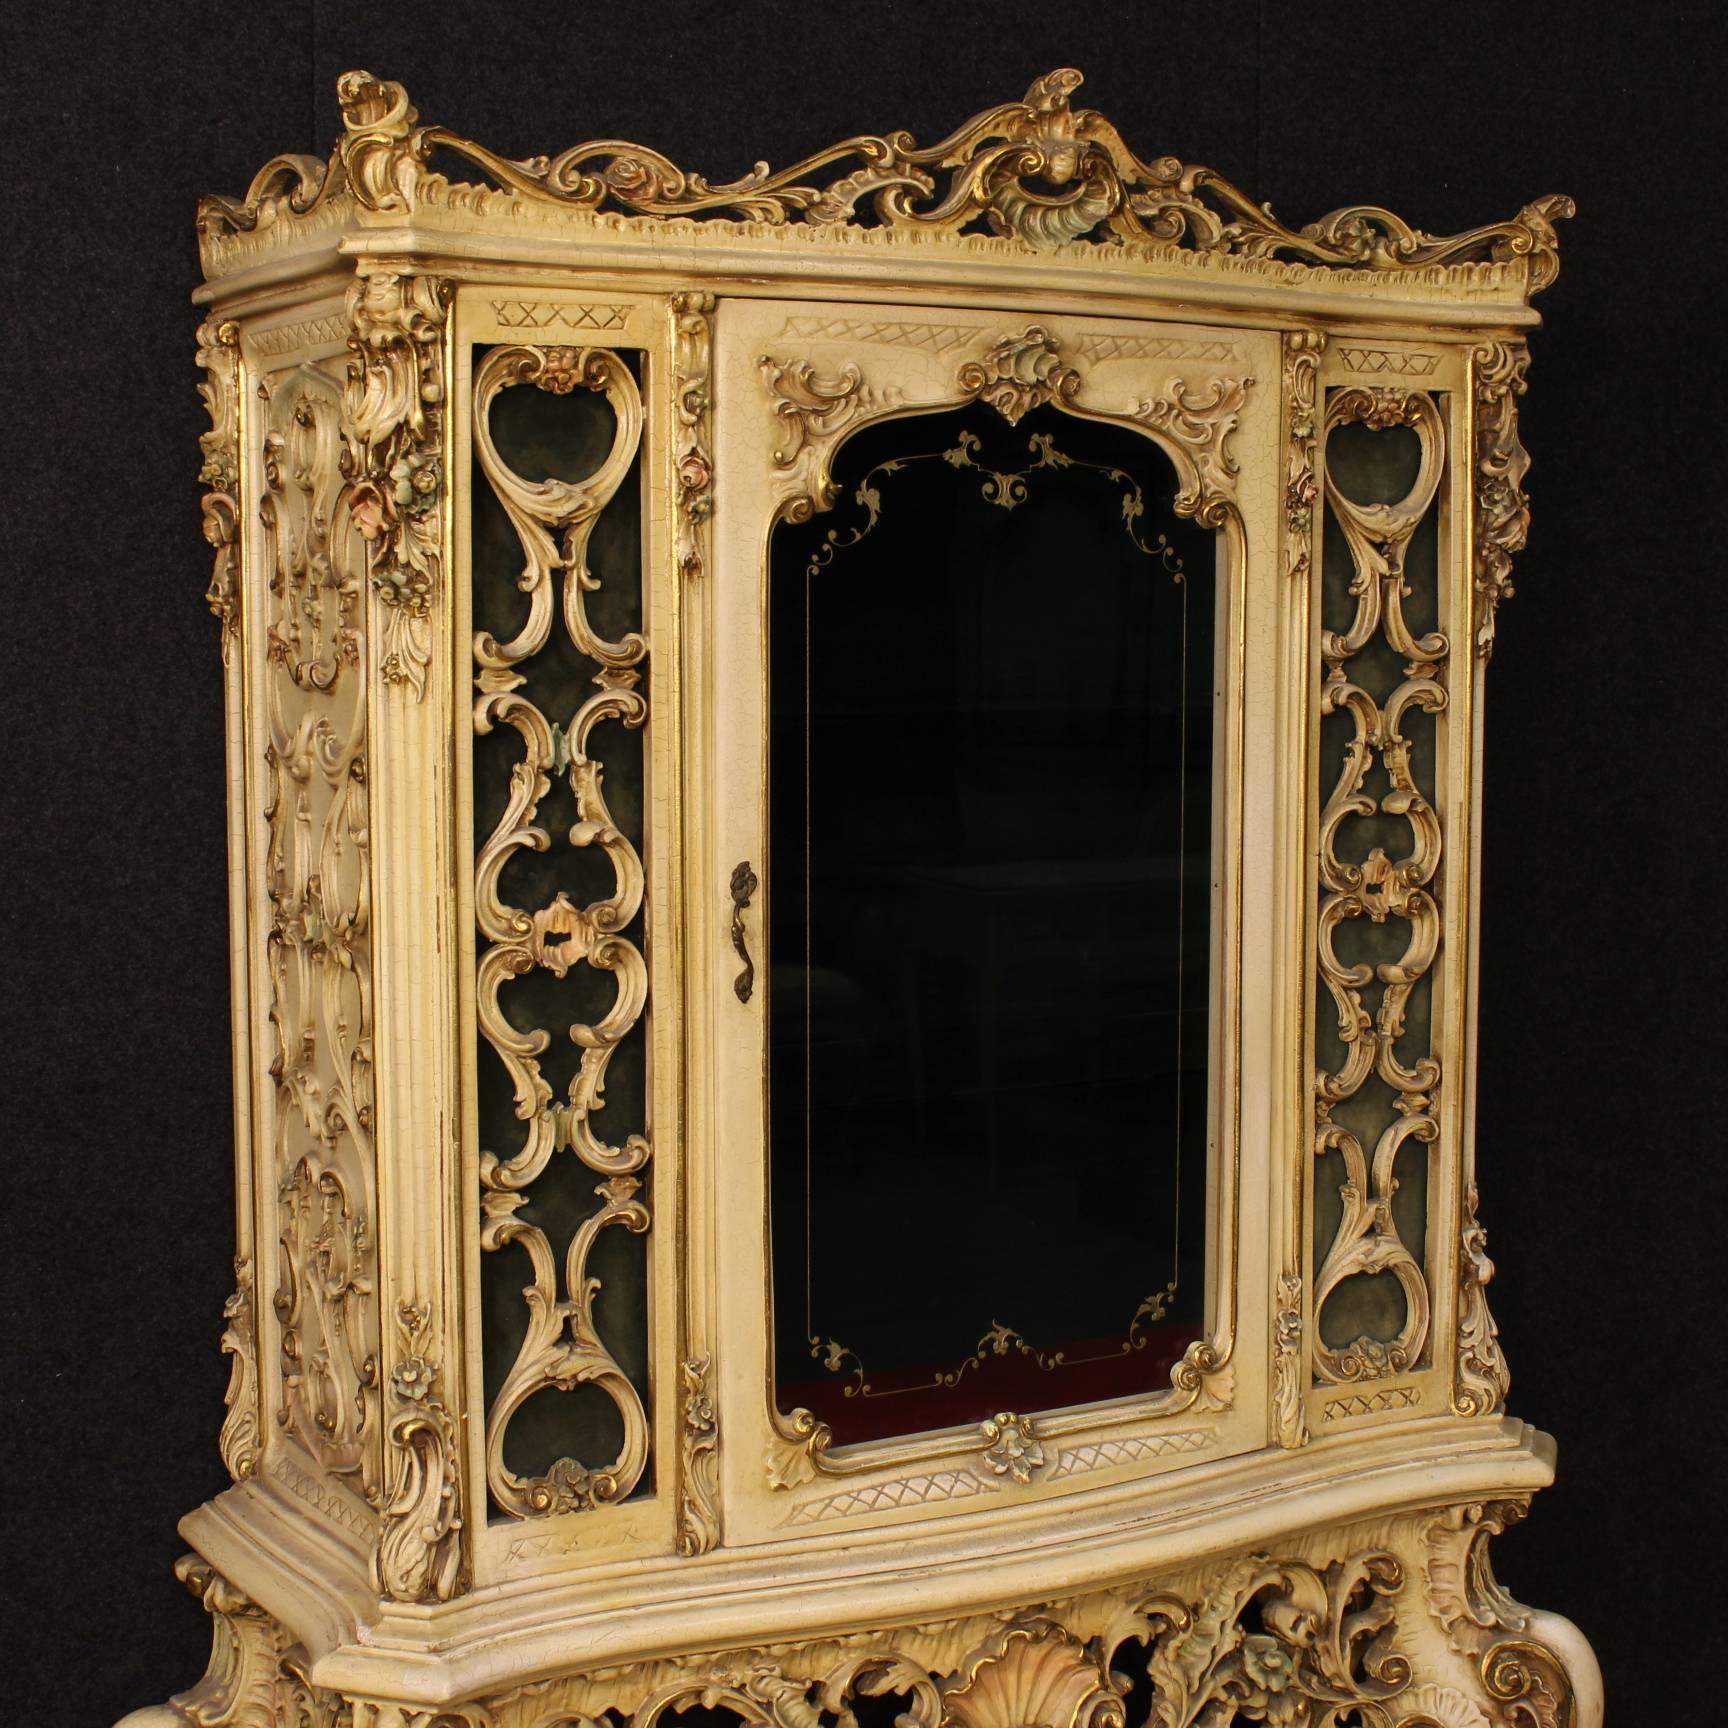 Scenic Venetian showcase of the late 20th century. Furniture made by lacquered, gilded and painted pressed wood and plaster of fabulous decoration. Double body furniture composed of a console and a showcase with one door, it is separable for easy